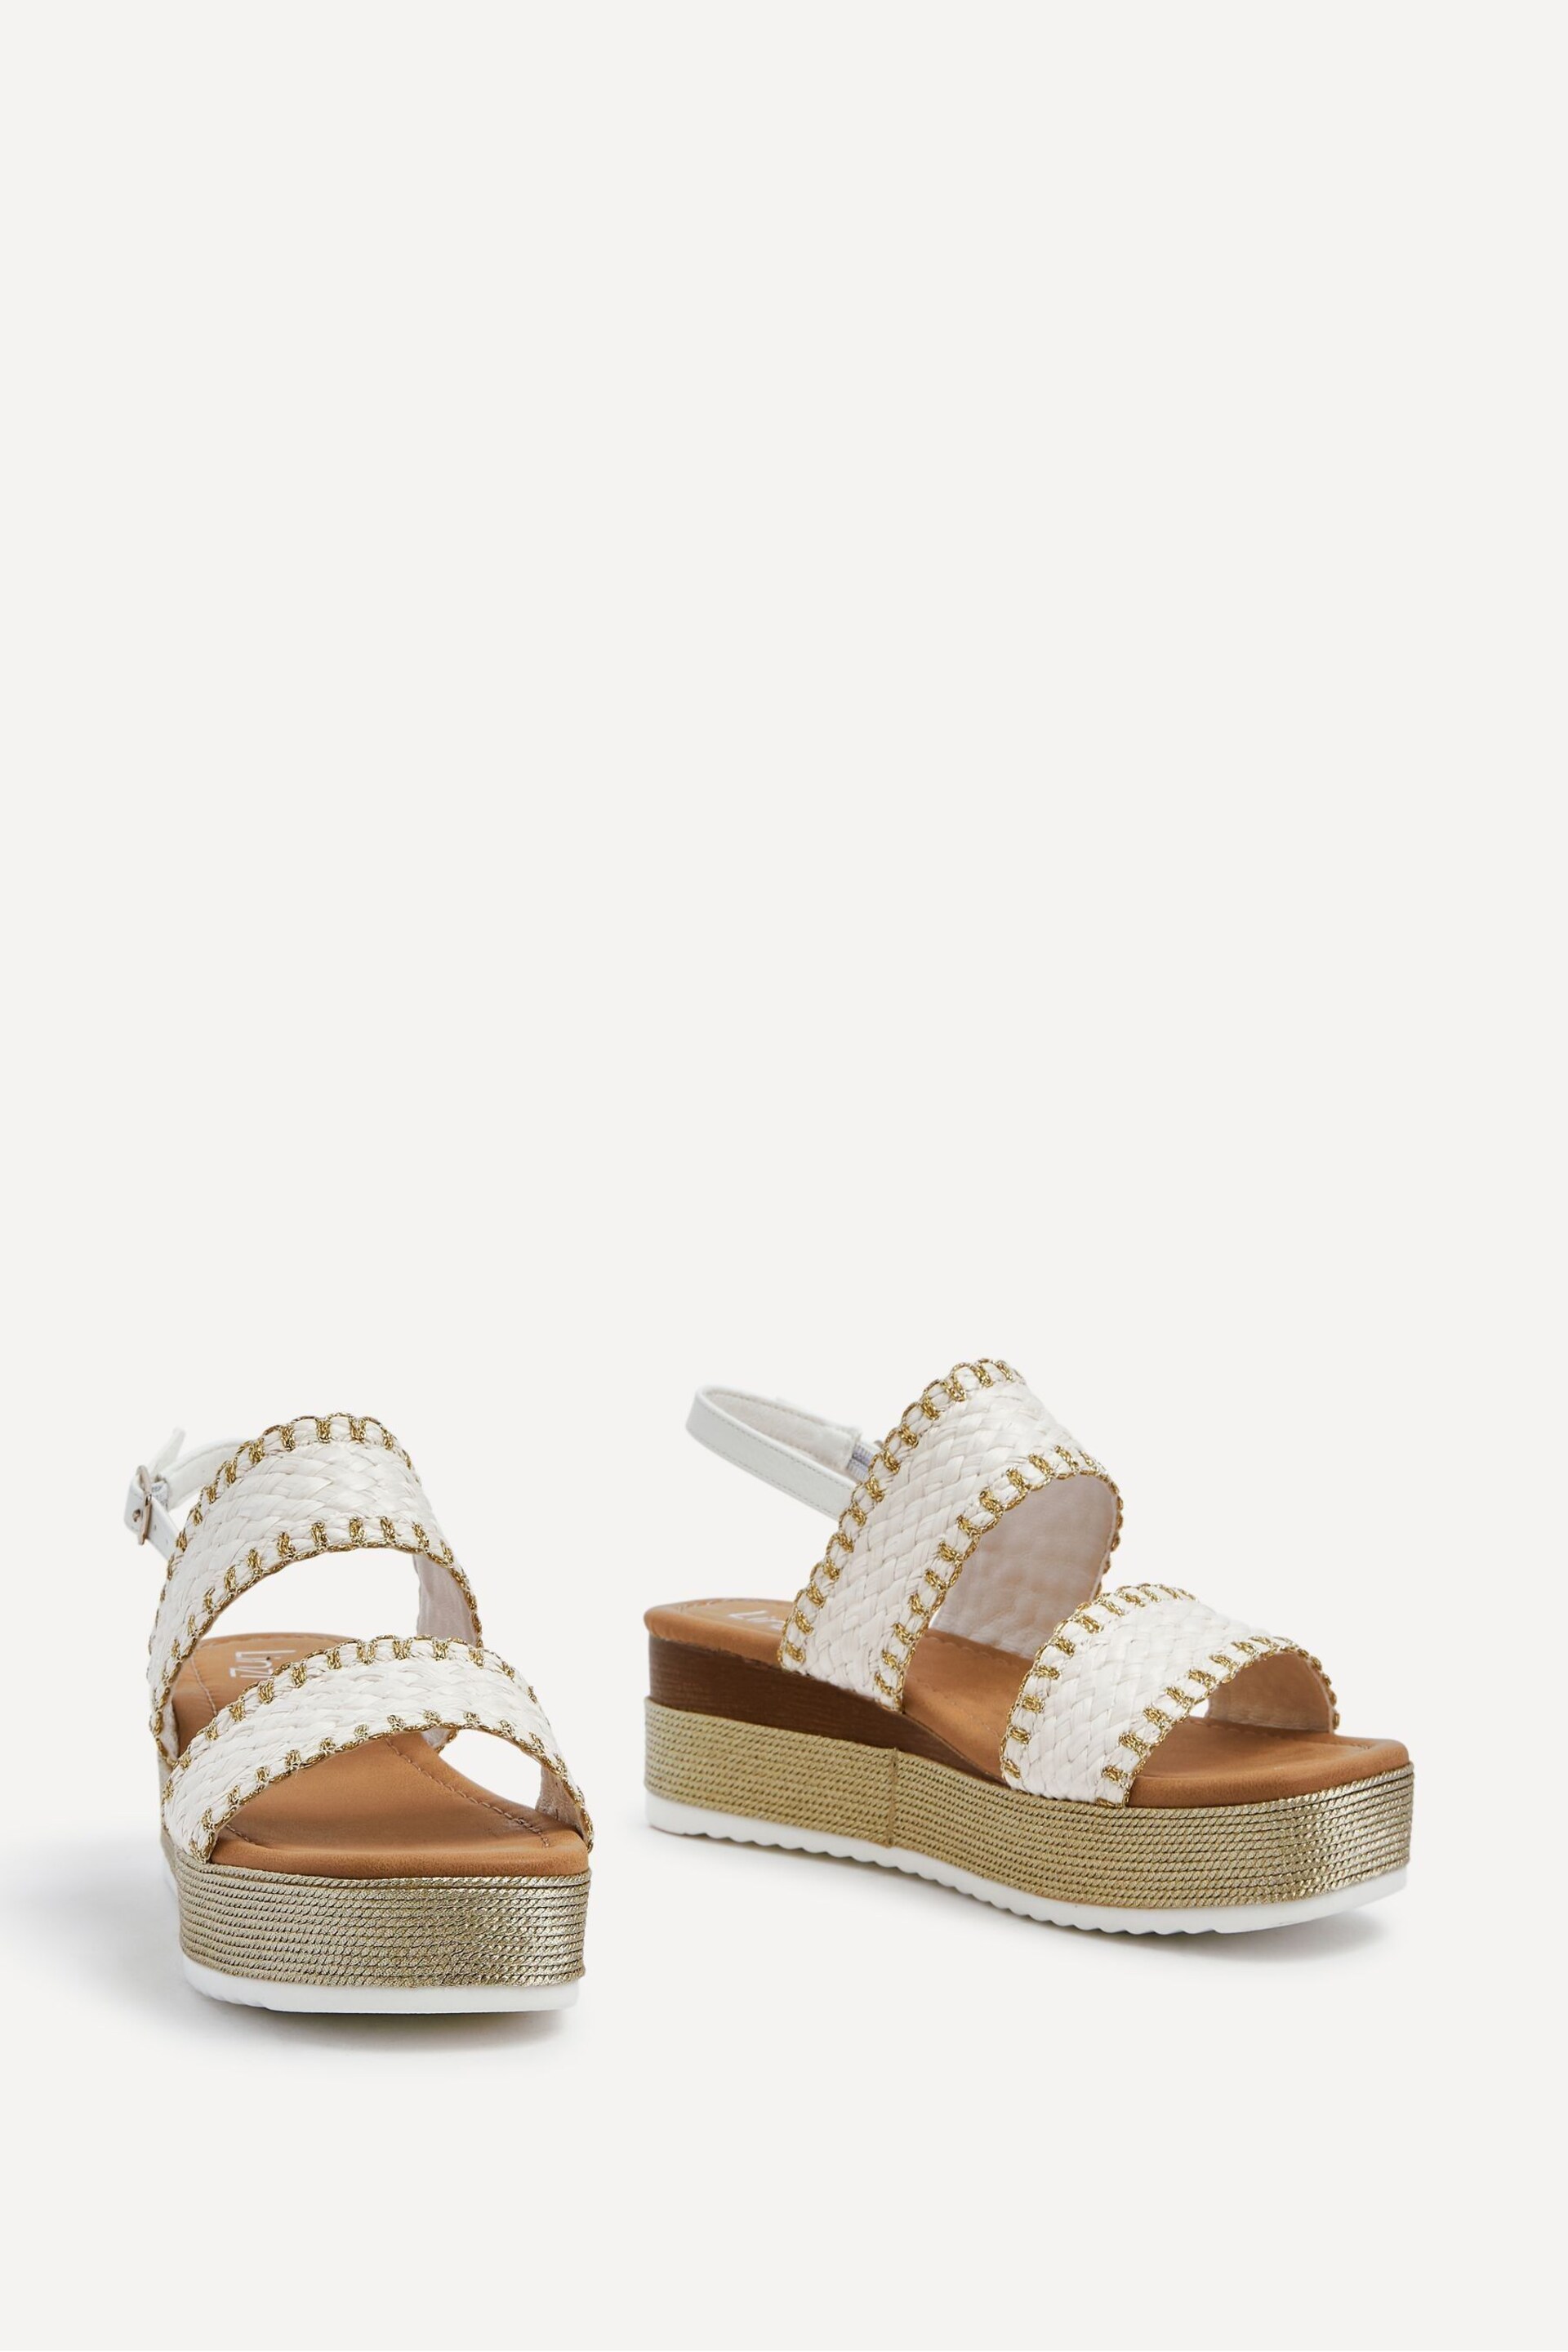 Linzi White Willow Two Strap Espadrille Inspired Platform Wedges - Image 3 of 5